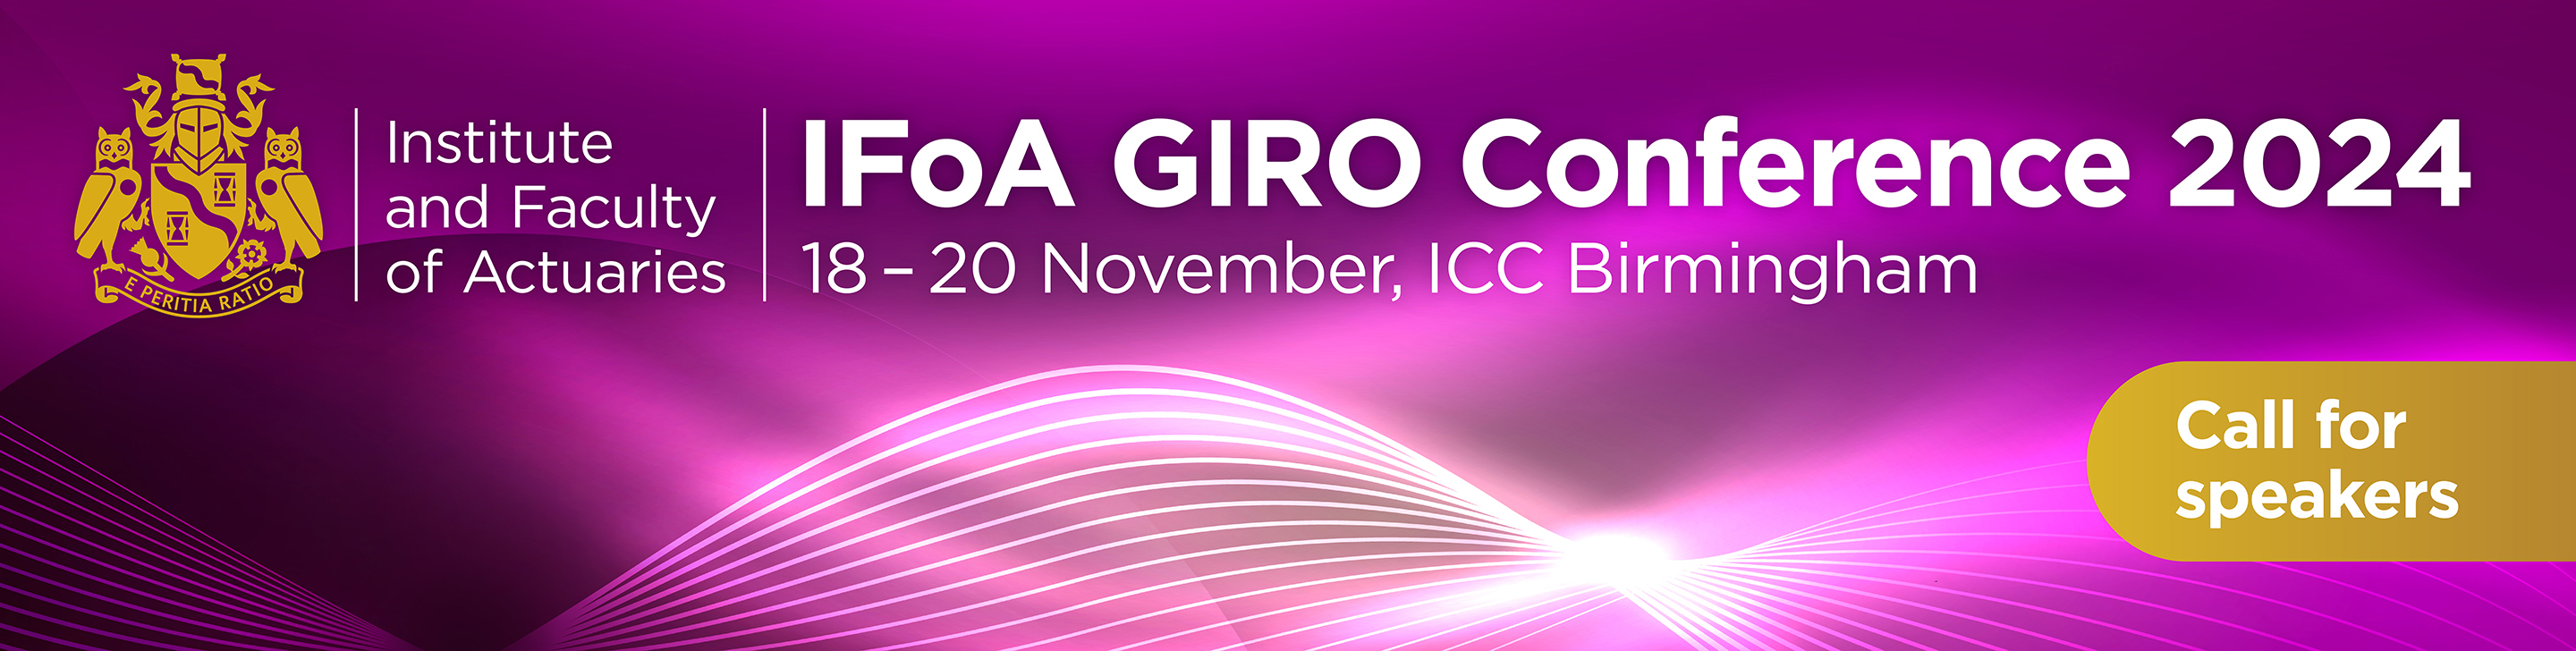 Call for speakers: IFoA GIRO Conference 2024, 18 to 20 November, ICC Birmingham